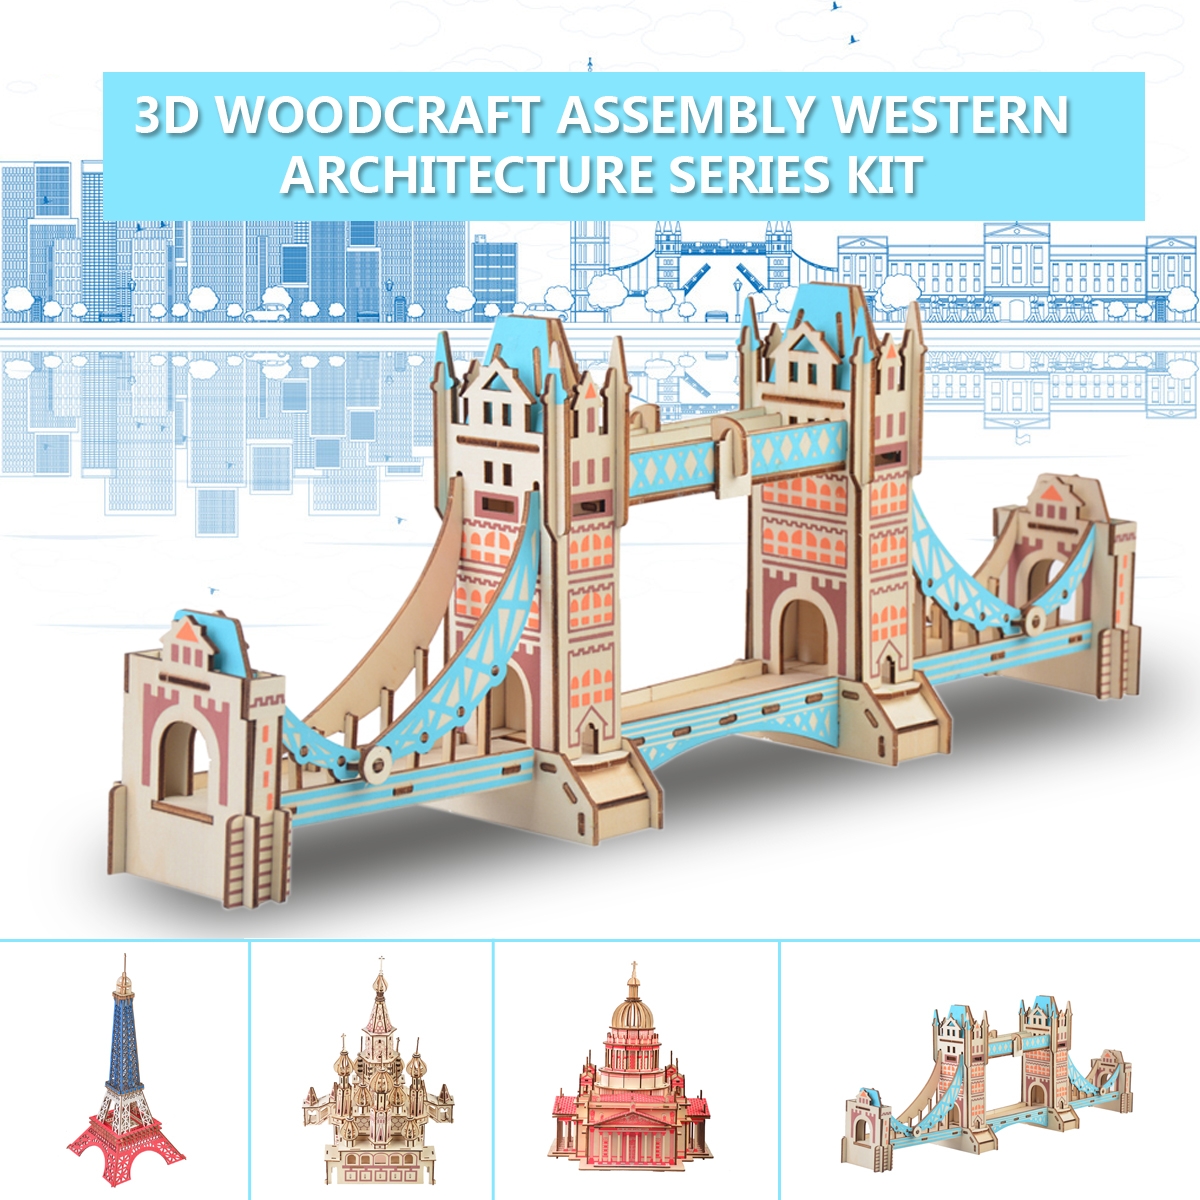 3D Woodcraft Assembly Western Architecture Series Kit Model Building Toy for Kids Gift